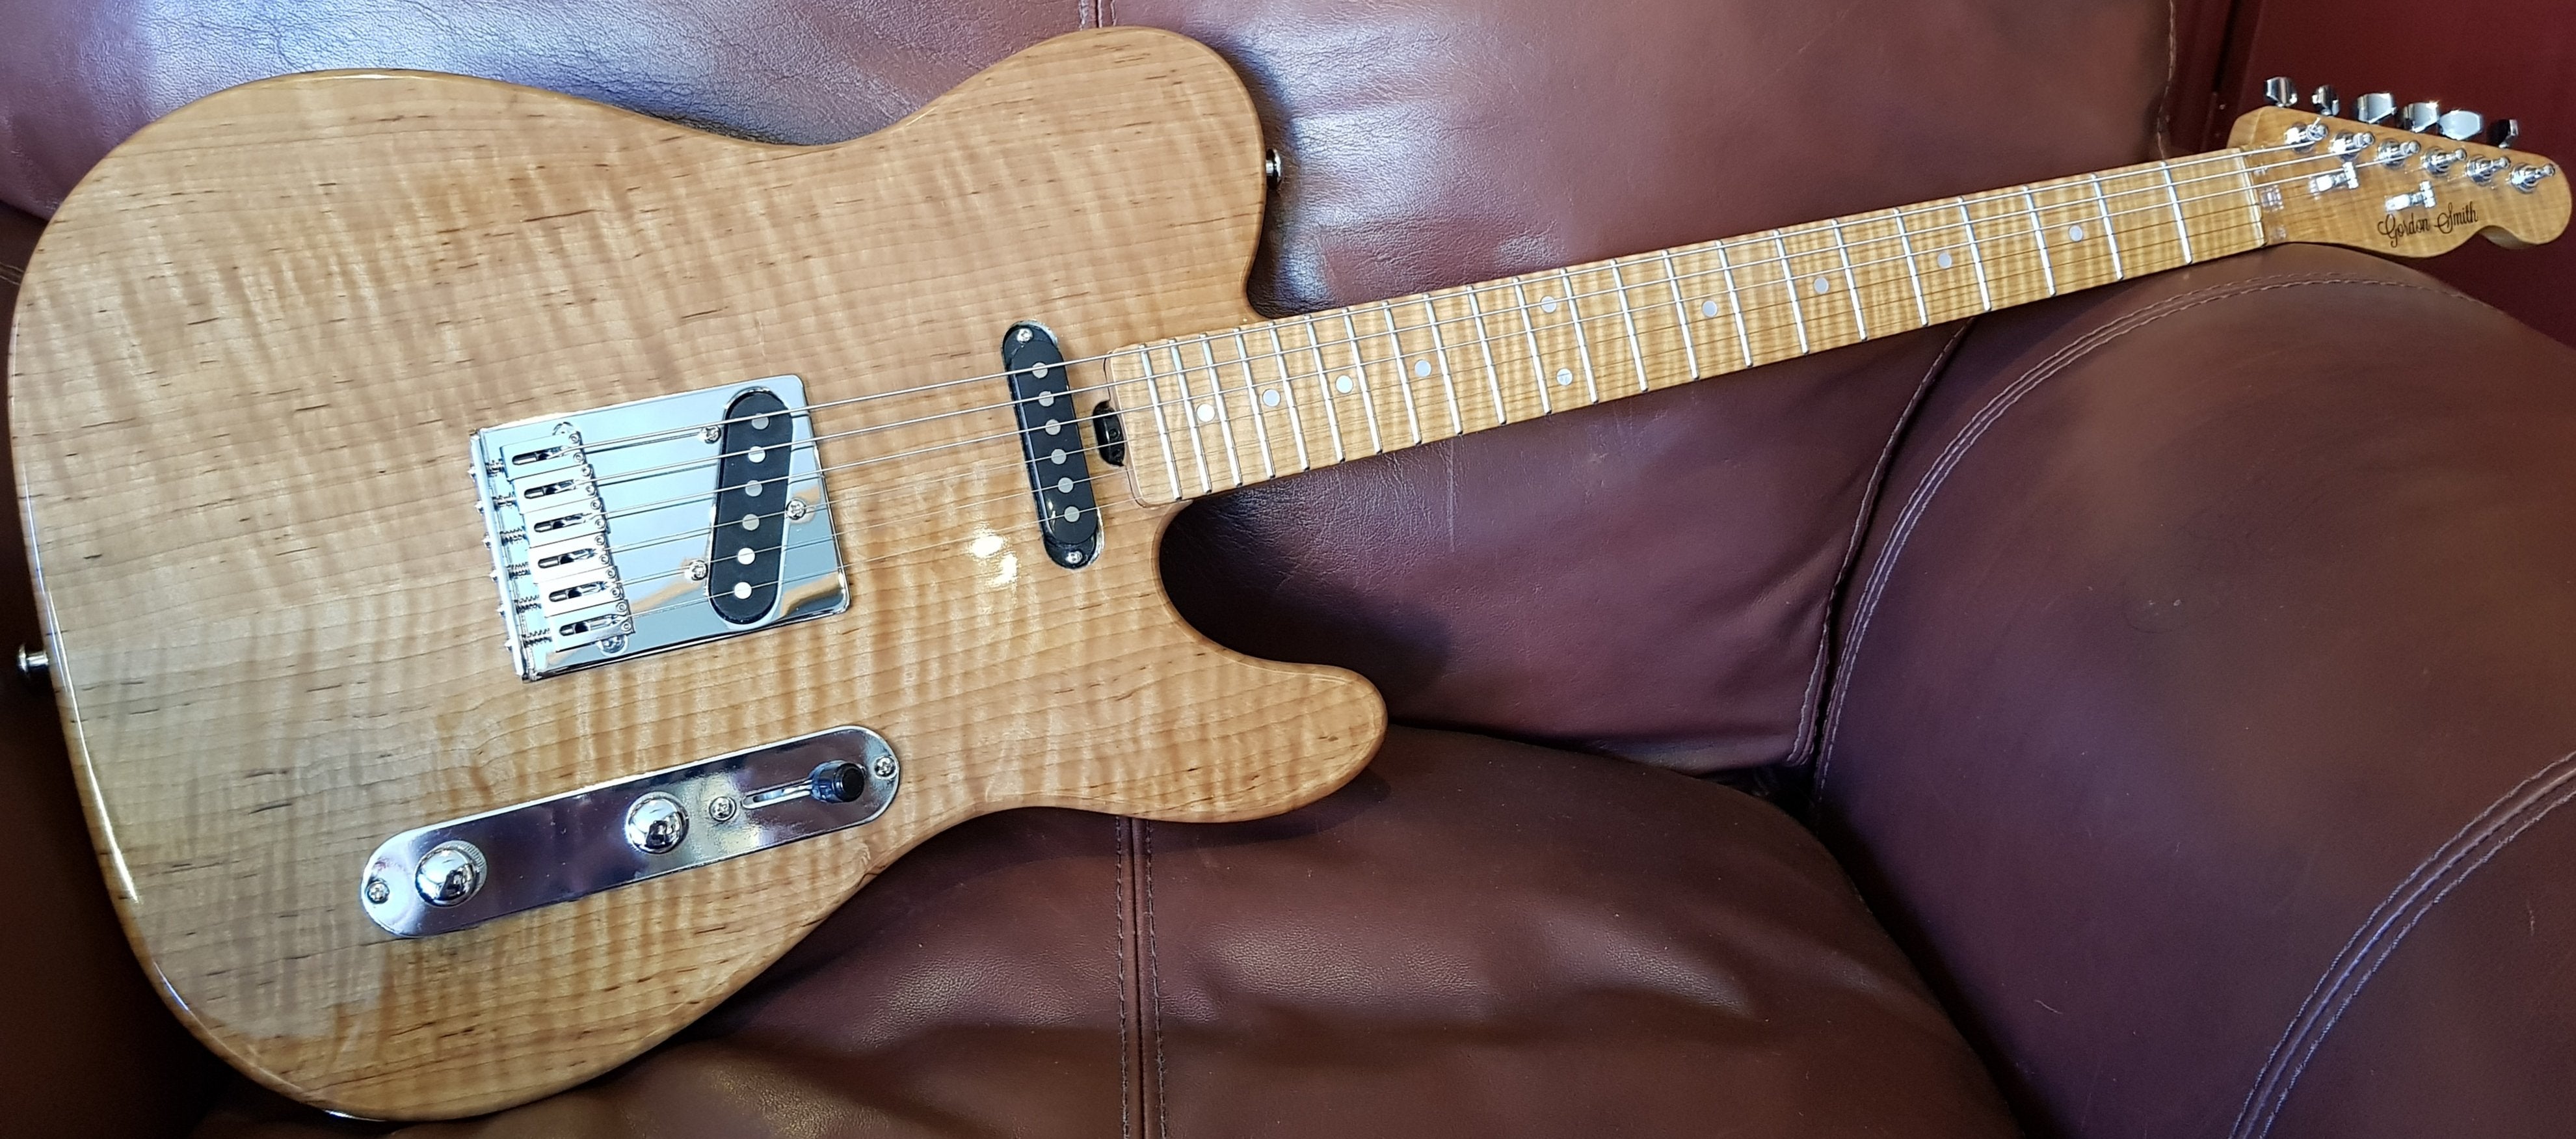 Gordon Smith Classic T Solid Figured Alder With AAAAA Honey Roasted Flame Maple Neck, Electric Guitar for sale at Richards Guitars.